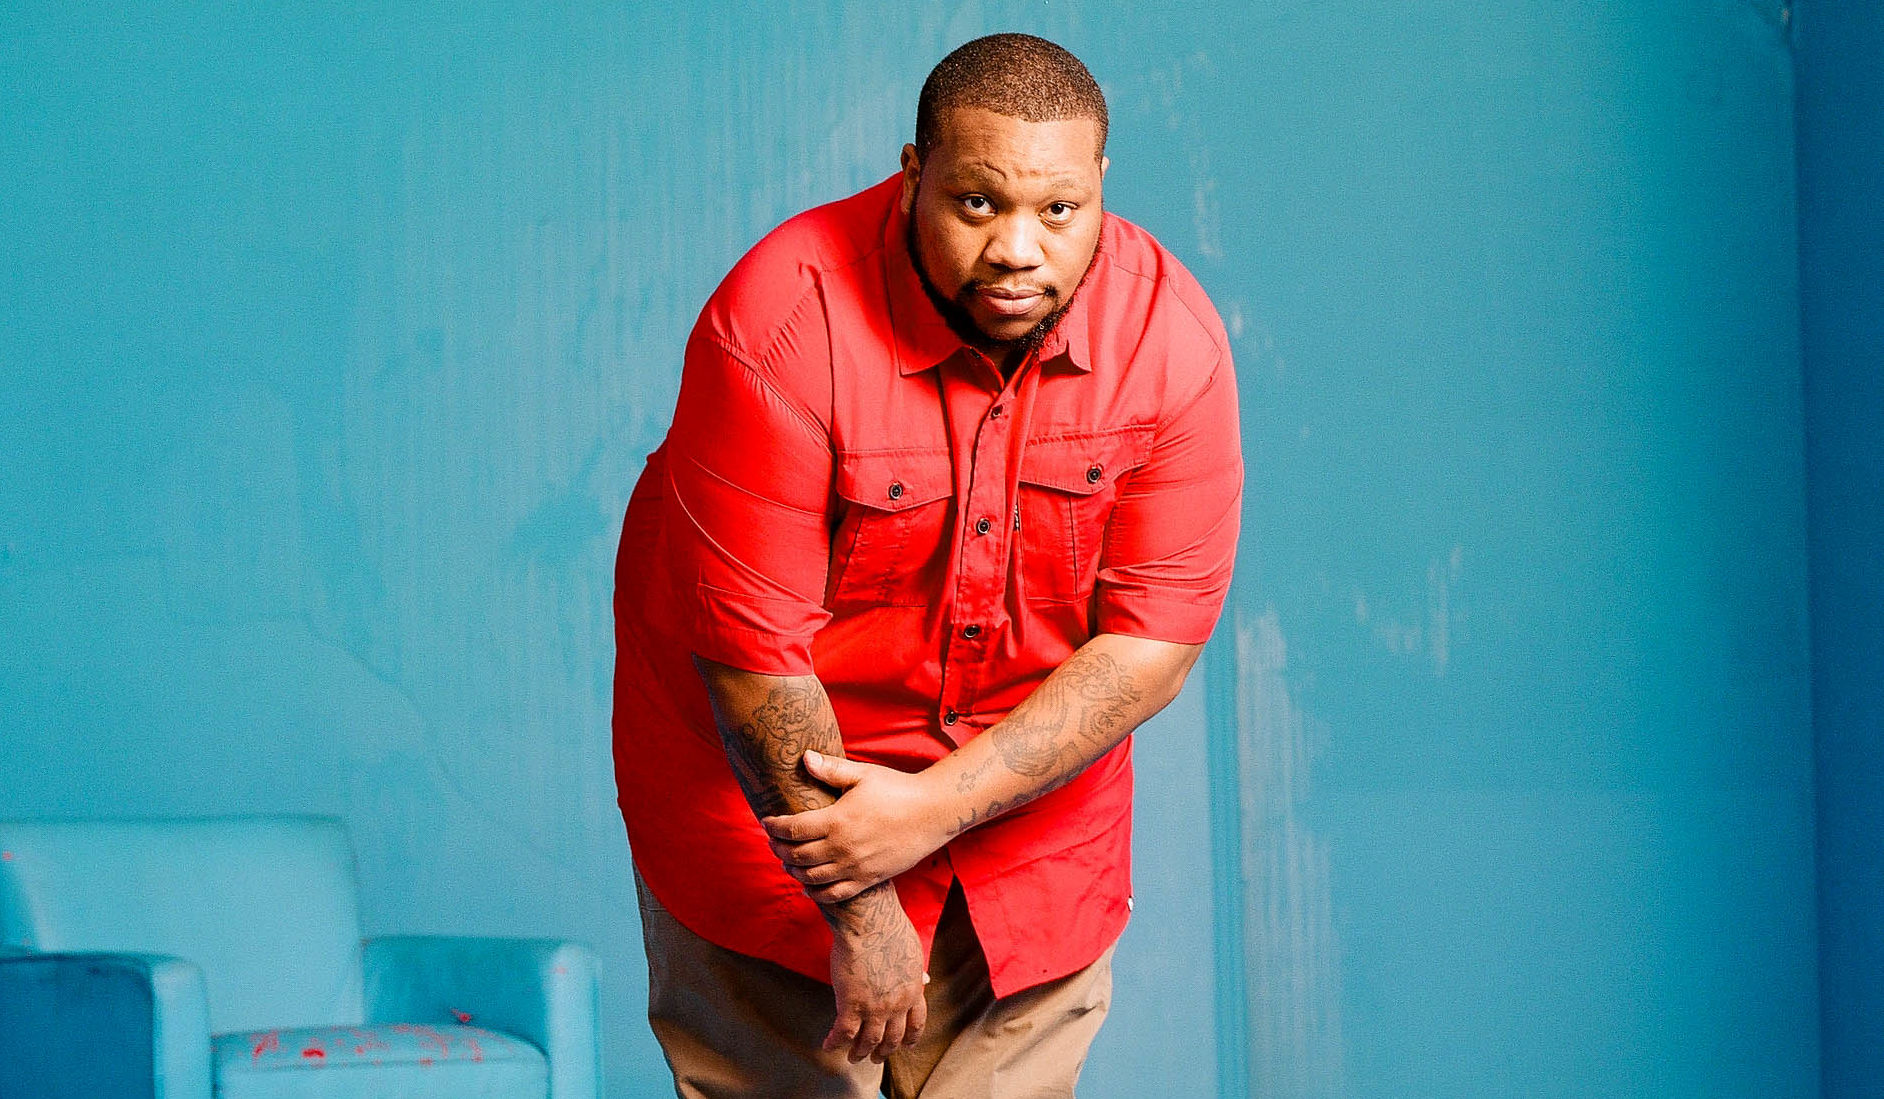 Rapper Big Pooh stands in his desire to be understood as an artist